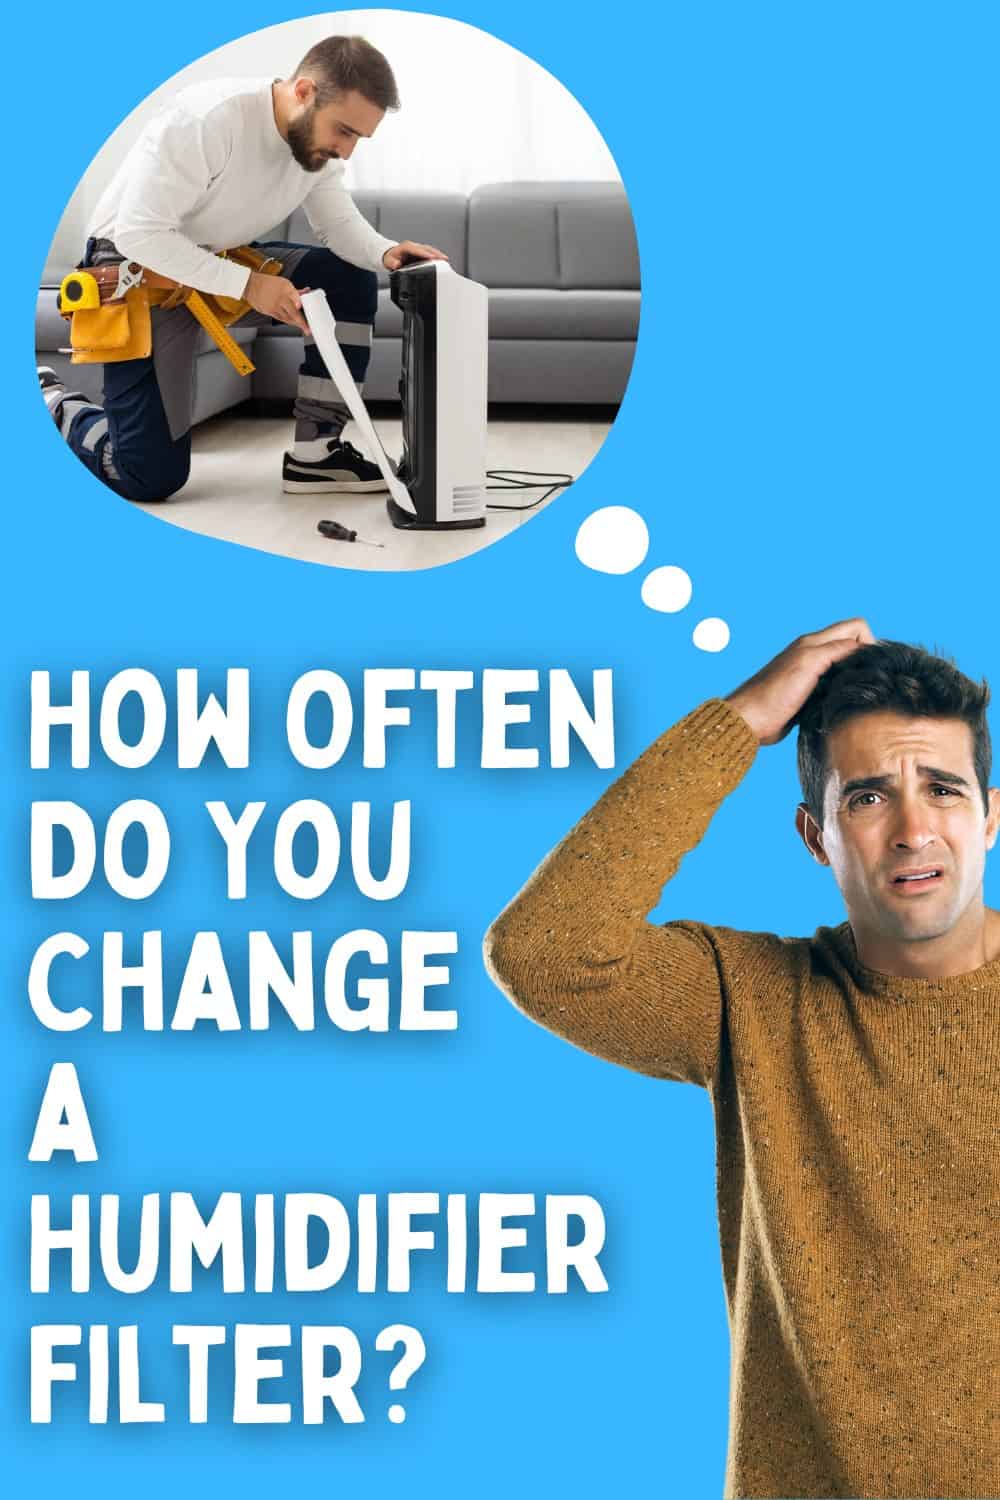 You should change your humidifier filter every 30 to 90 days